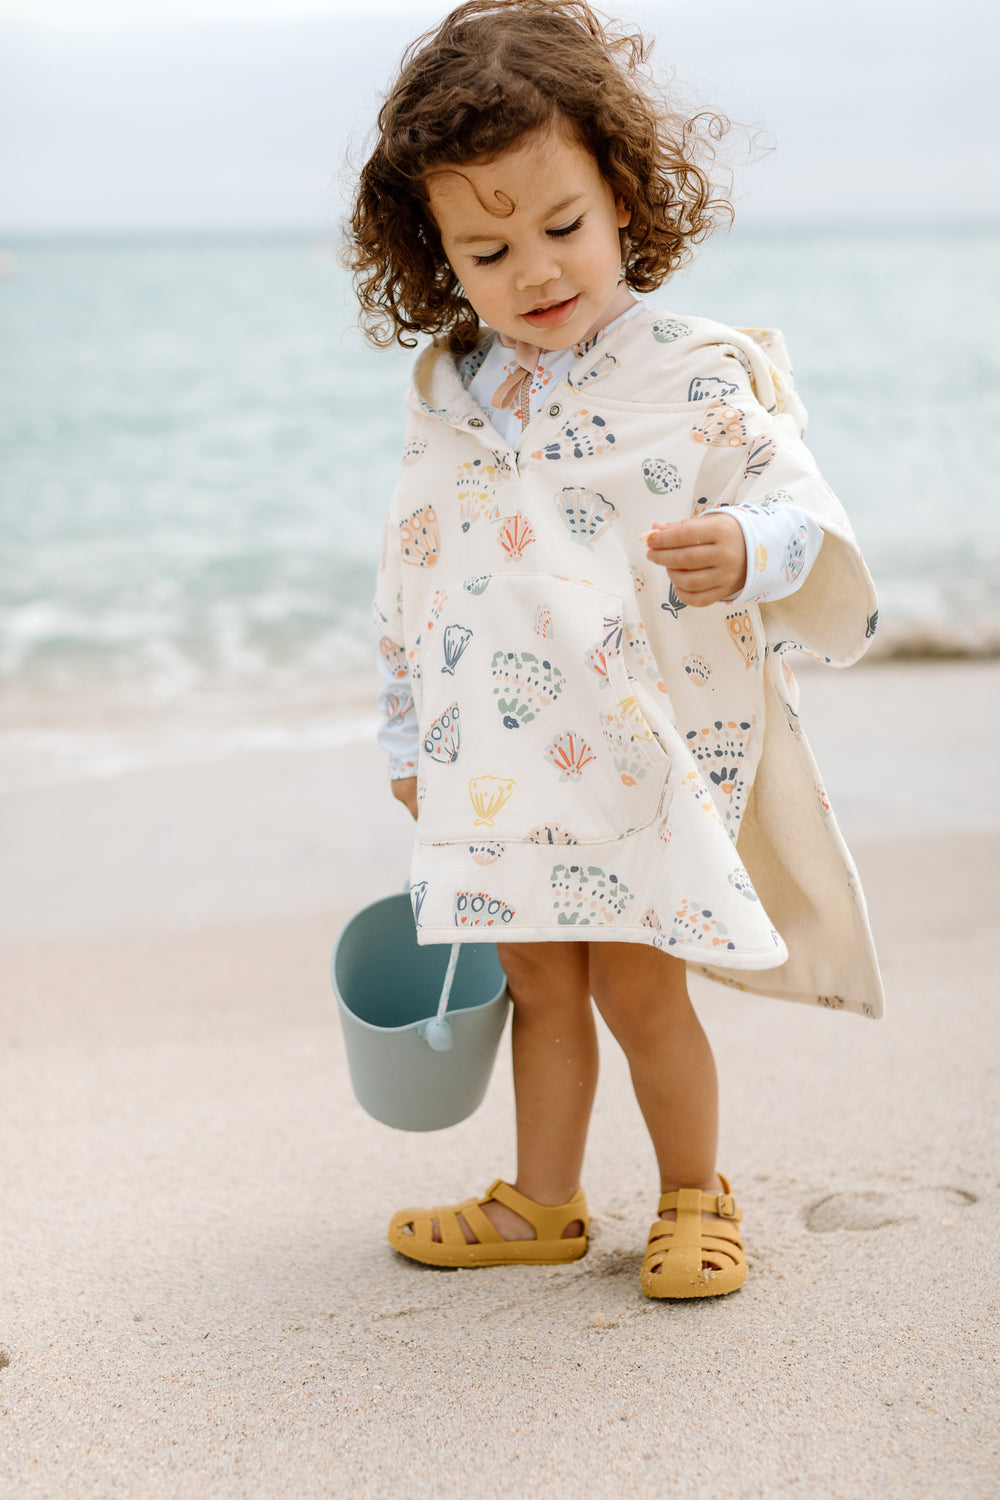 Best Organic Baby Clothes, Organic Cotton Kids Clothing